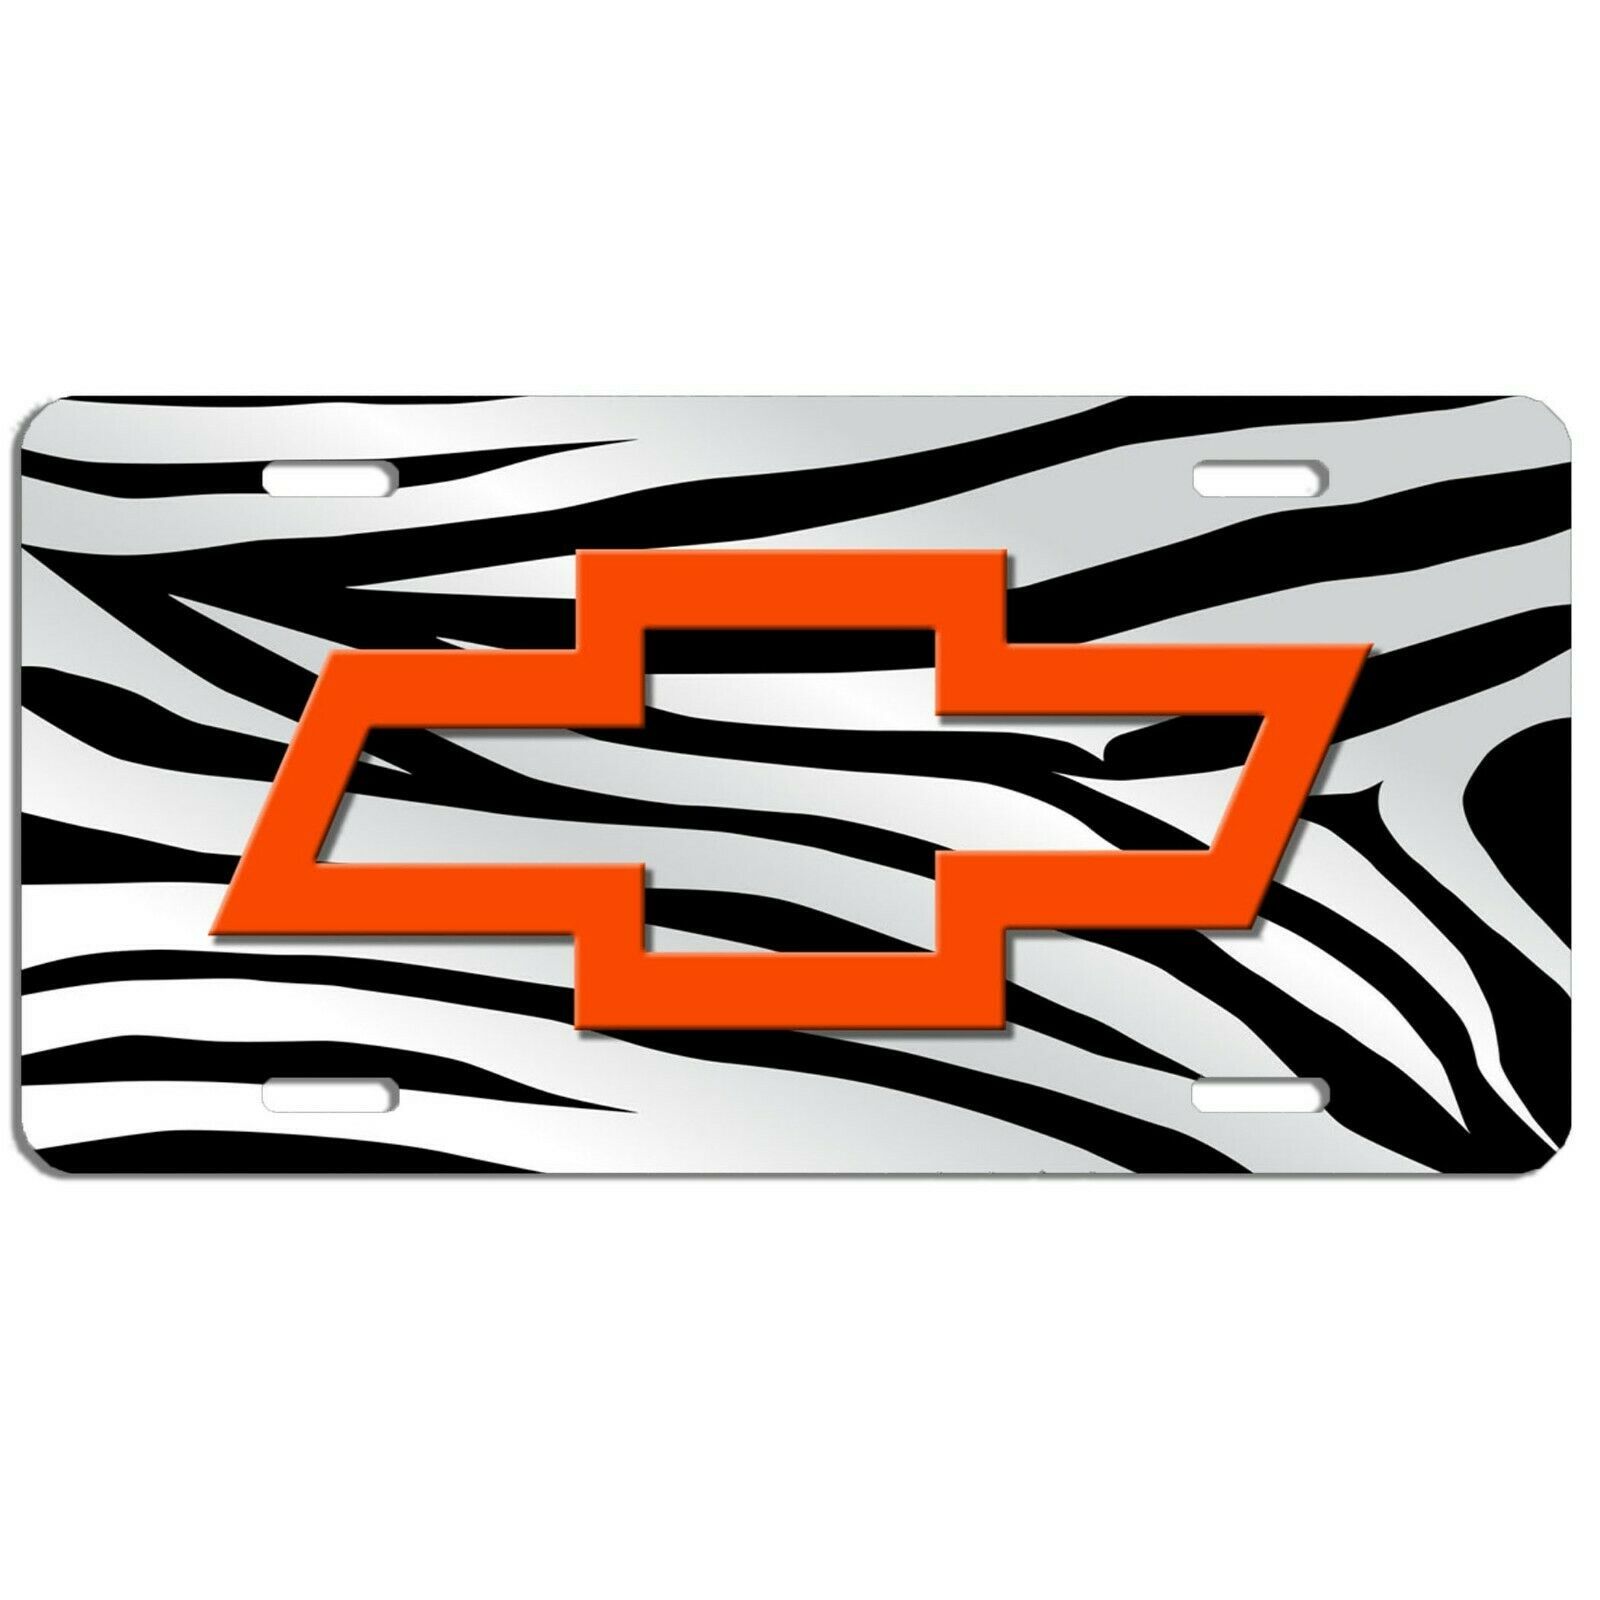 Primary image for Chevy bowtie vehicle aluminum license plate car truck SUV zebra & orange tag